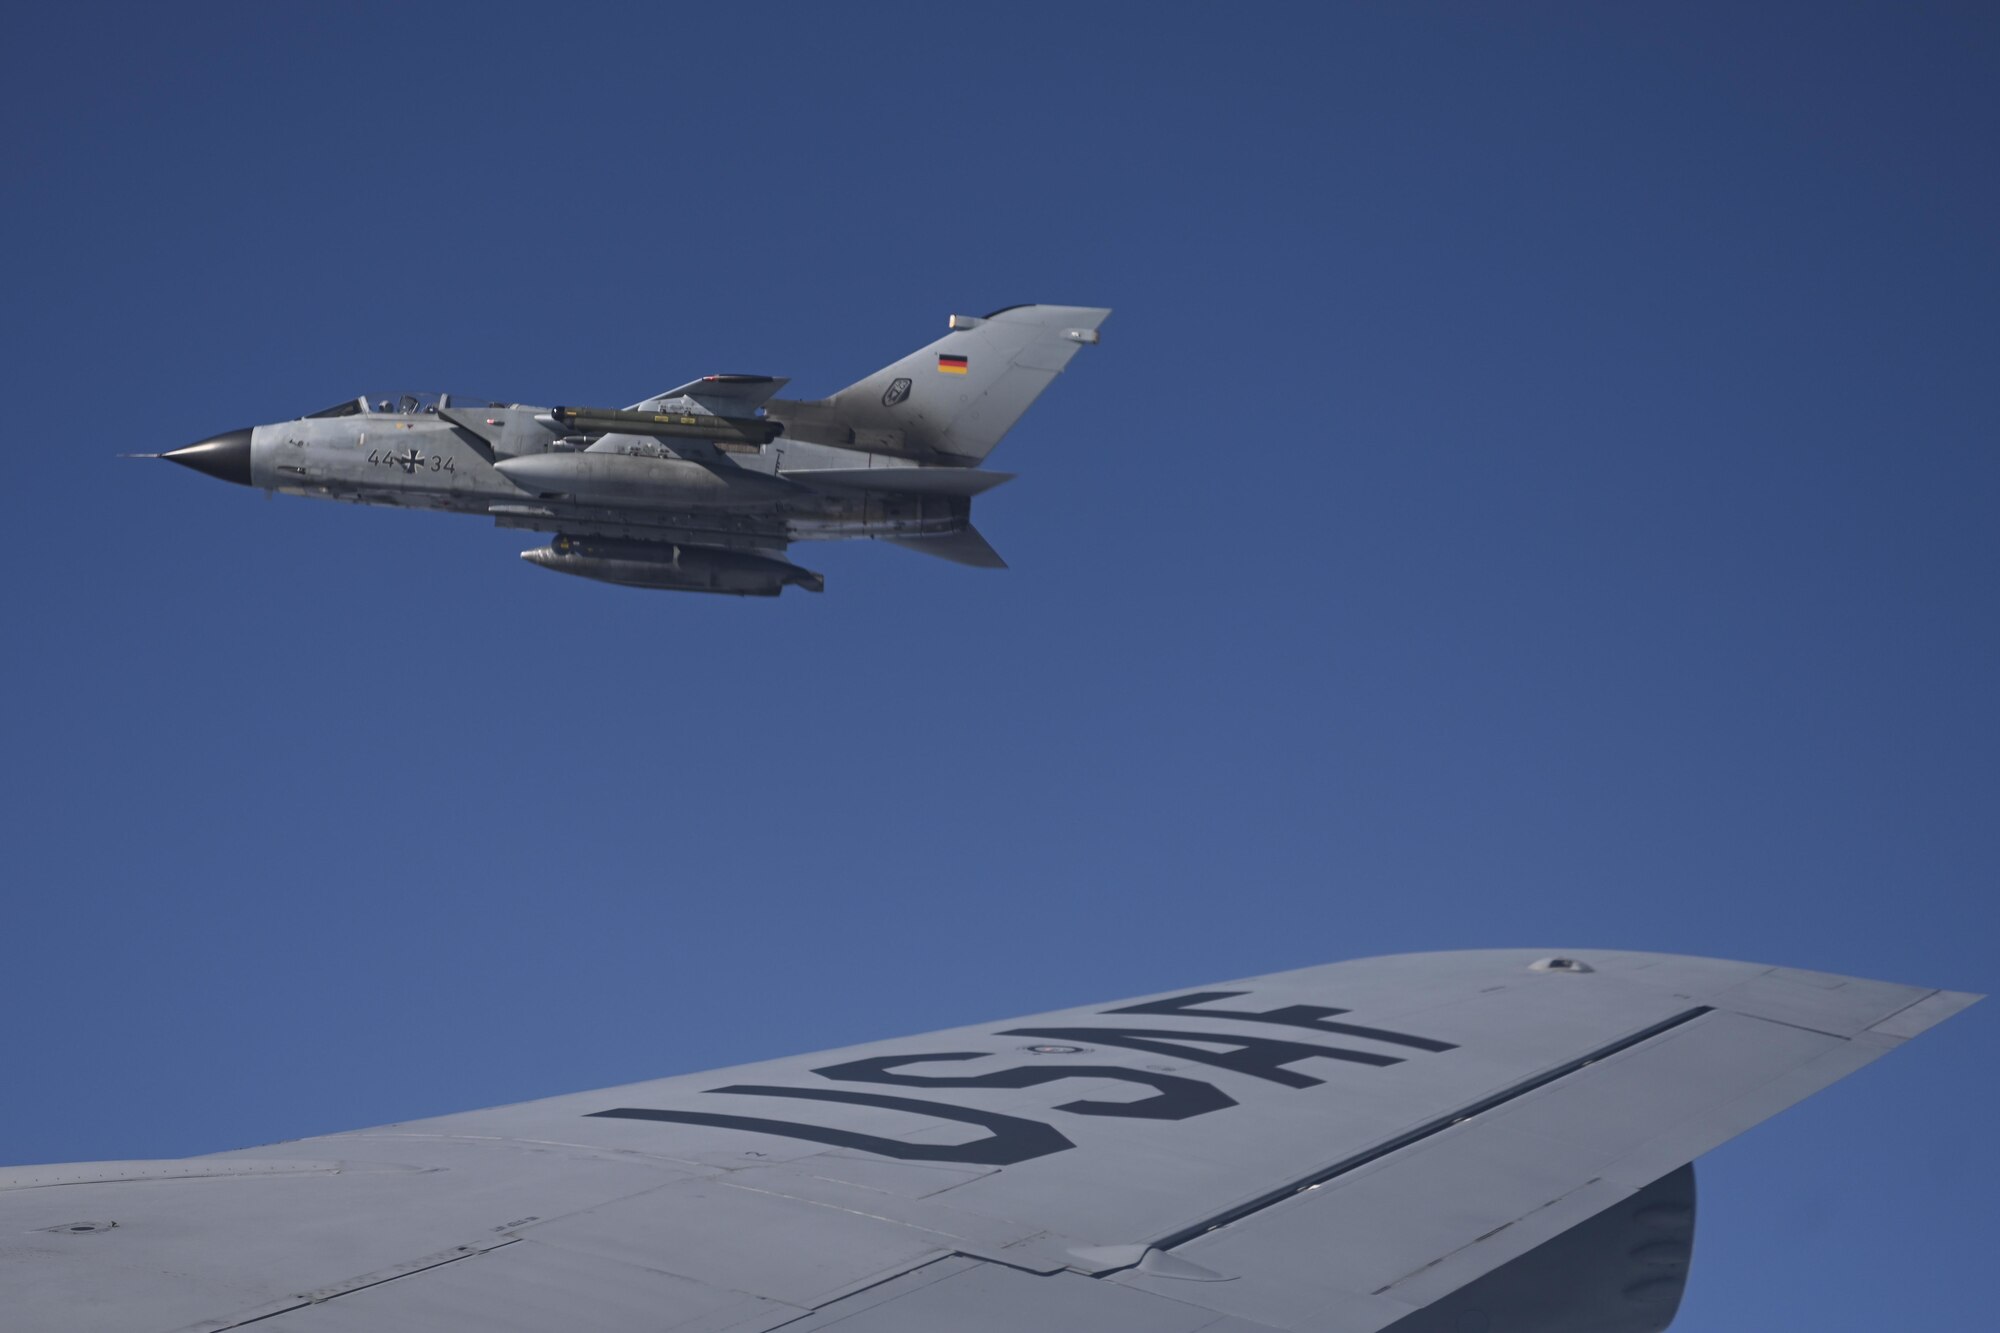 A German air force Tornado aircraft flies off the wing of a U.S. Air Force KC-135 Stratotanker aircraft assigned to the 100th Air Refueling Wing, Royal Air Force Mildenhall, England, after receiving fuel over Germany Aug. 2, 2021. The aerial refueling capabilities of the 100th ARW’s KC-135s extend the range of U.S., allied and partner-nation fighter aircraft. (U.S. Air Force photo by Senior Airman Joseph Barron)